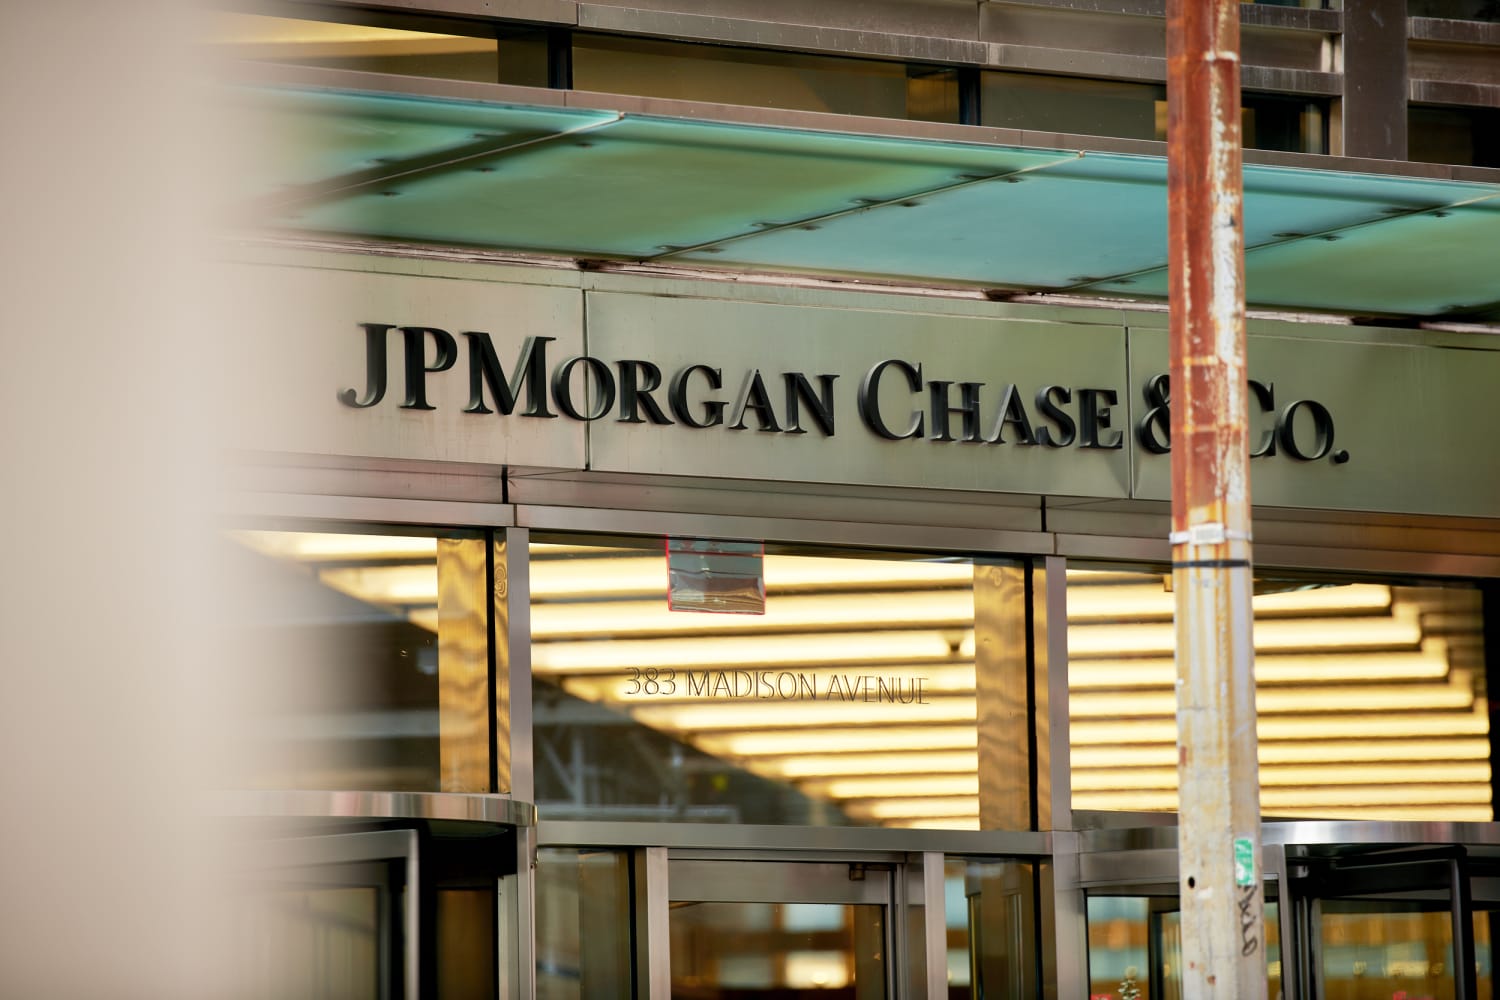 Second Frank financial aid executive charged in JPMorgan fraud case